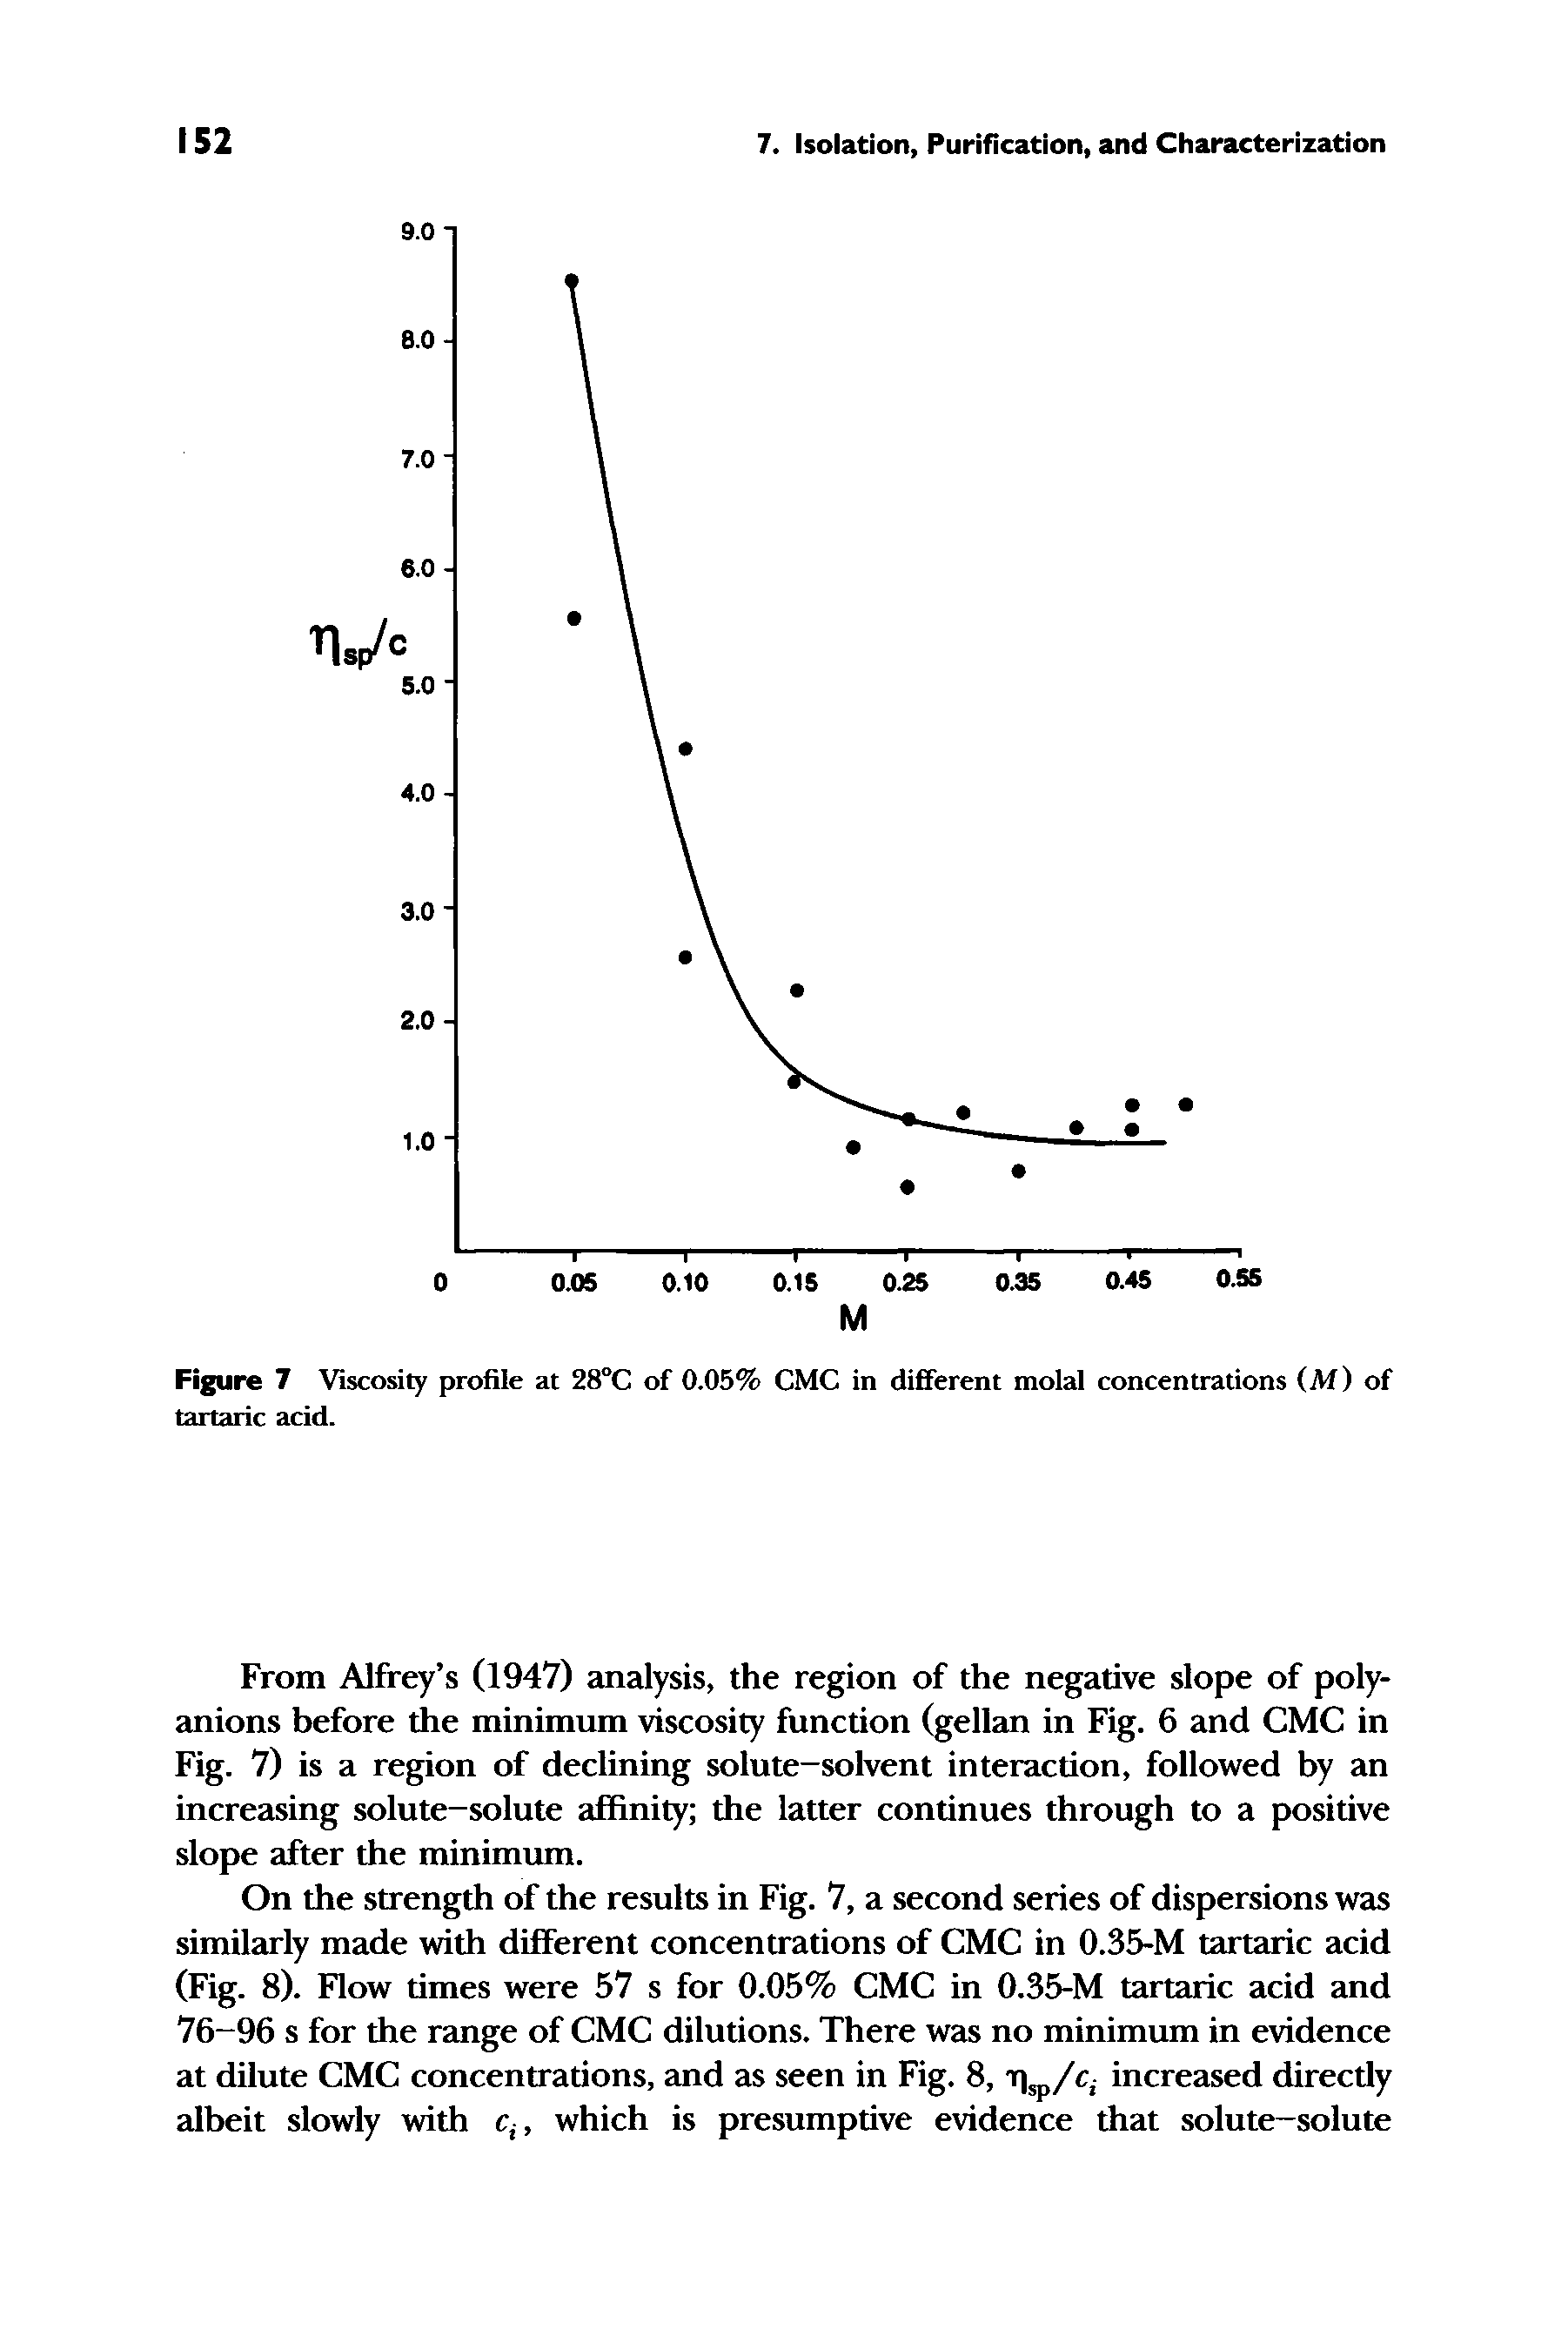 Figure 7 Viscosity profile at 28°C of 0.05% CMC in different molal concentrations (M) of tartaric acid.